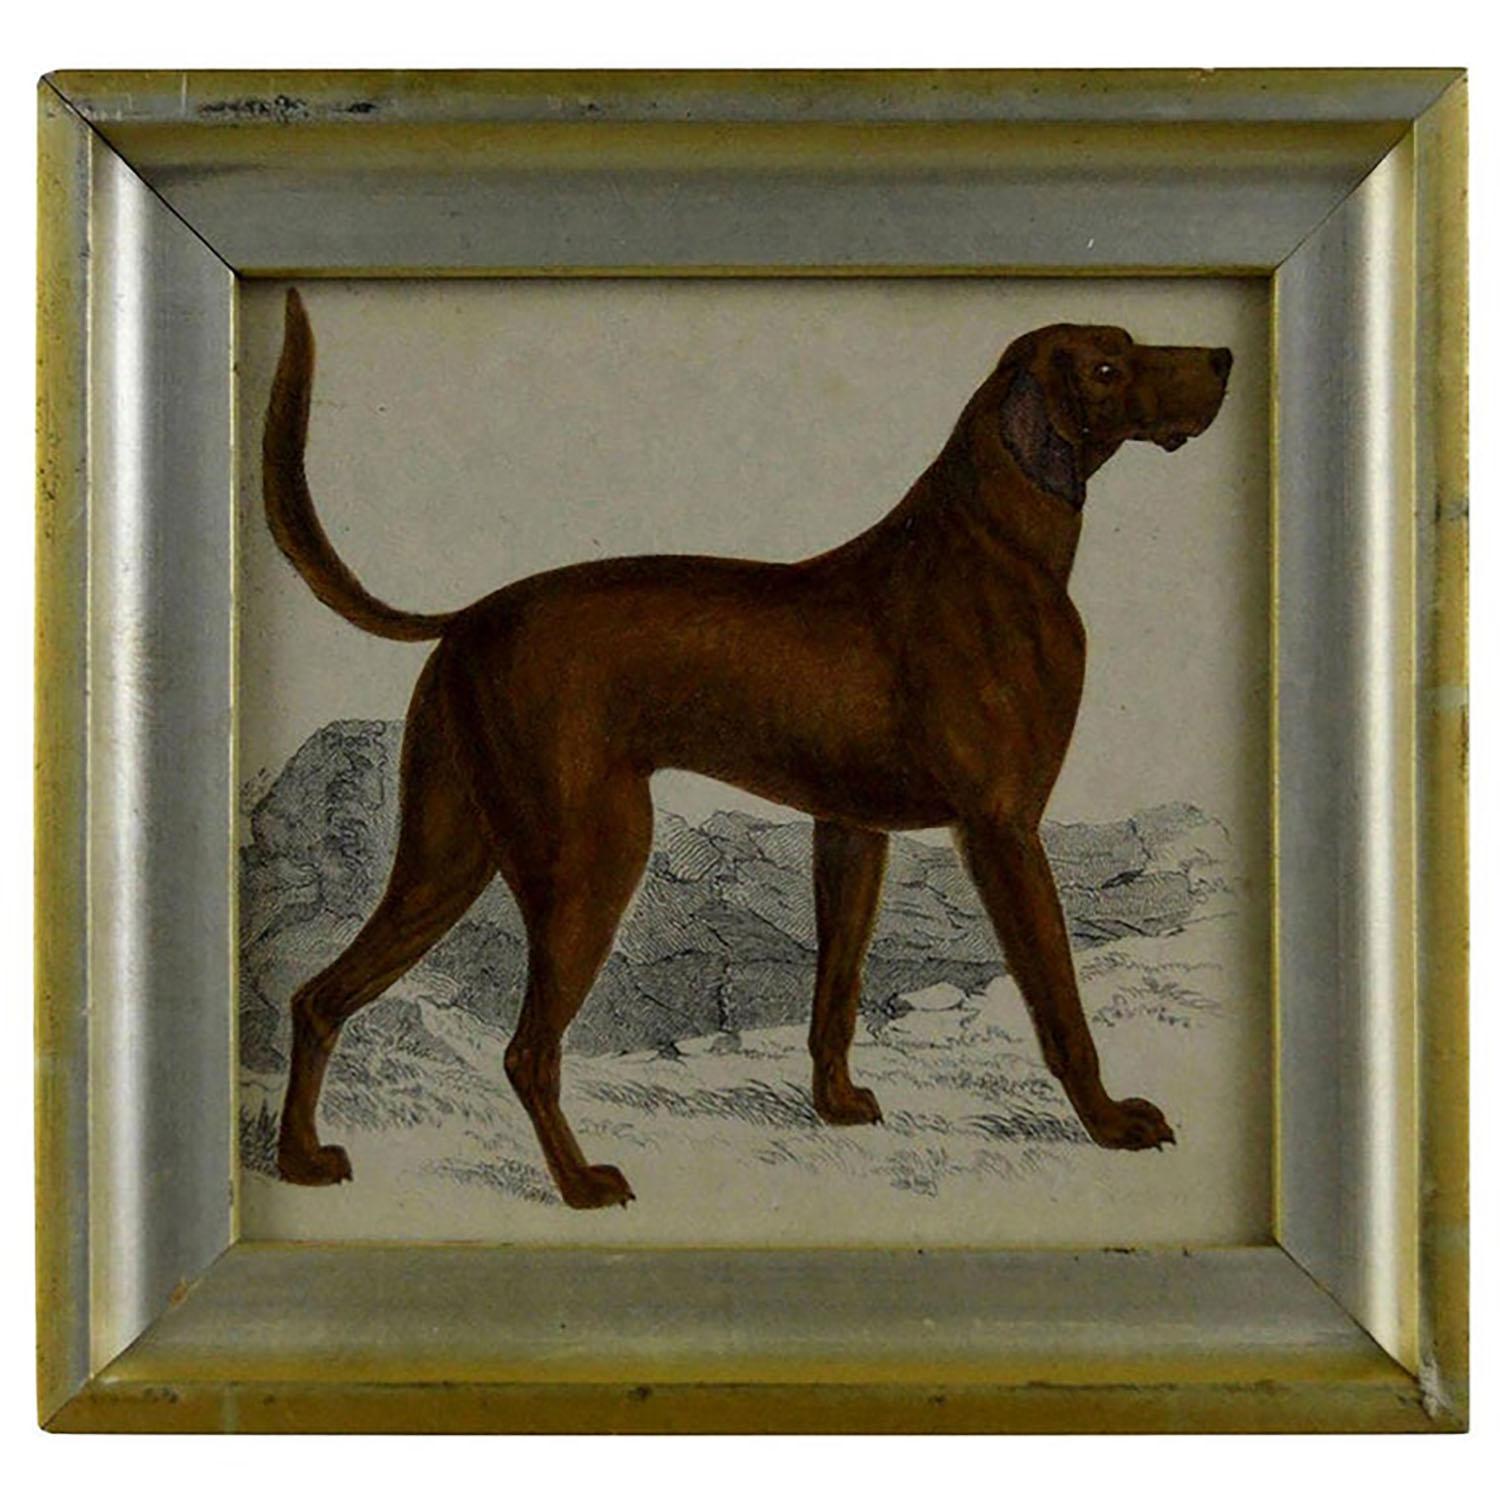 Great image of a bloodhound presented in a distressed antique gilt frame.

Lithograph after Cpt. brown with original hand color.

Published, 1847.

Free shipping.


